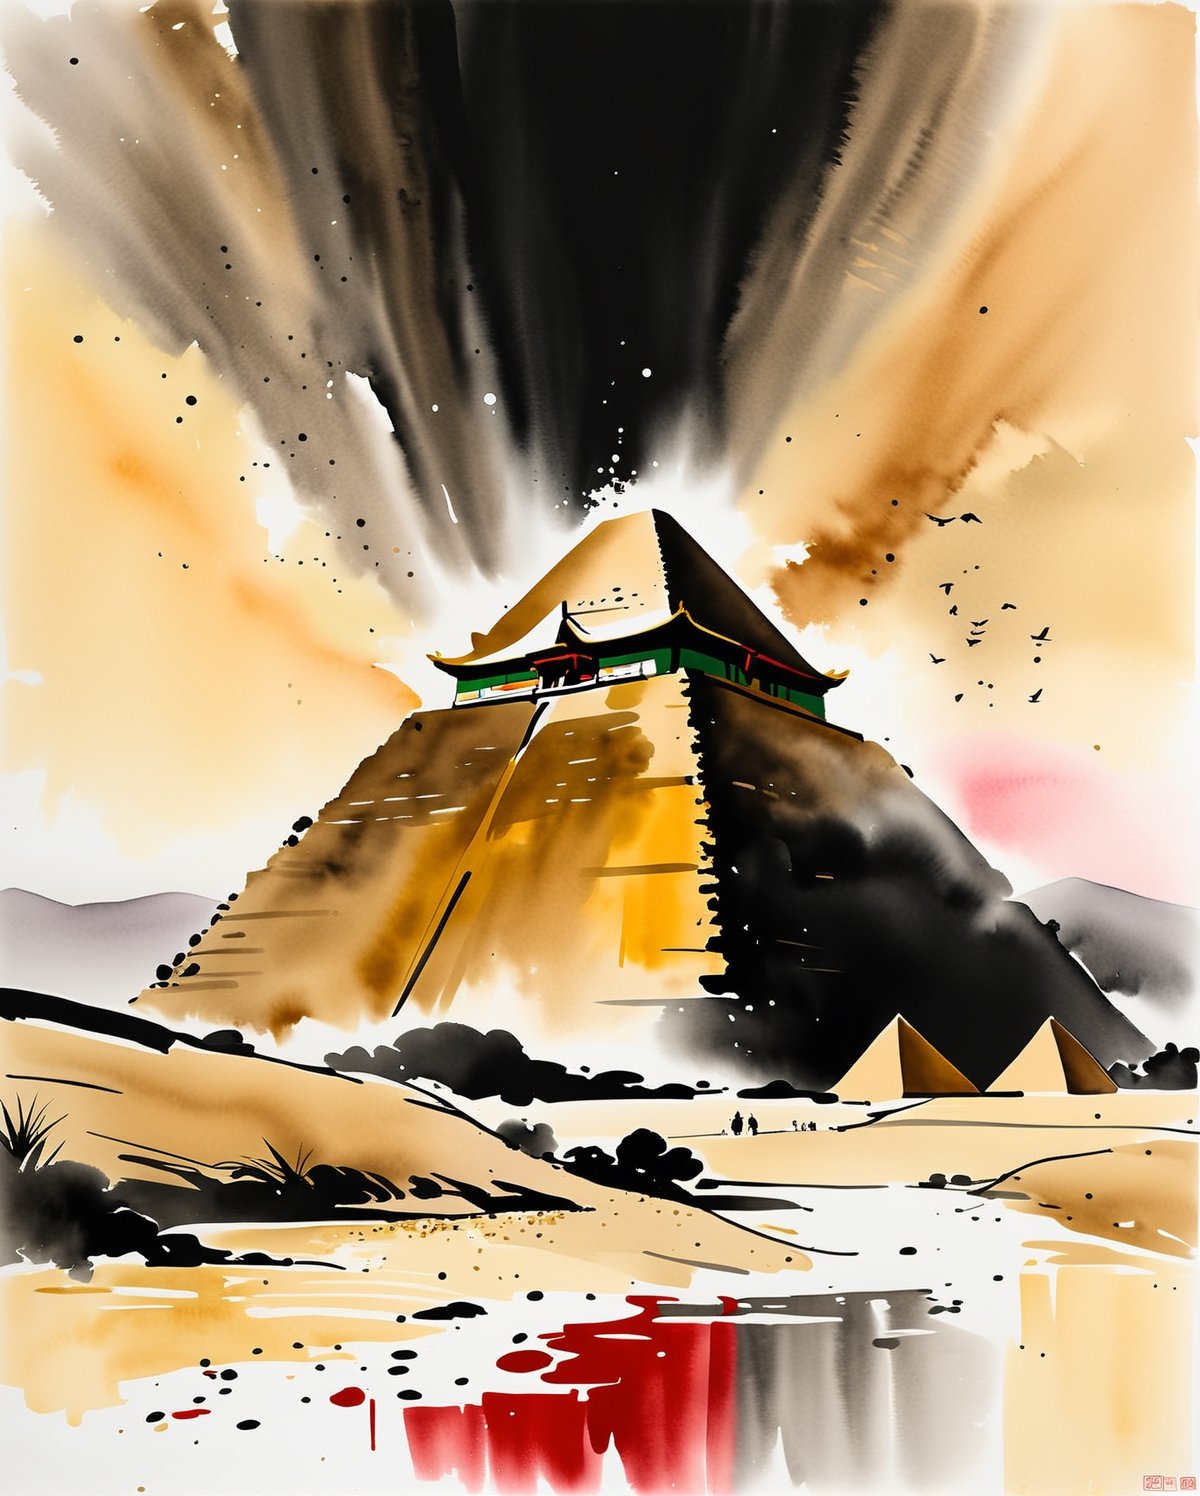 In this artistic endeavor, merge the traditional Chinese ink wash technique with the stylistic elements of Wu Guanzhong, harmonizing them with the iconic silhouette of the Egyptian pyramids. Embrace the fluidity and expressiveness of Chinese ink painting, capturing the essence of the ancient structures with bold brushstrokes and dynamic composition. Incorporate Western painting concepts such as perspective and light to add depth and realism to the scene, enhancing the majestic presence of the pyramids. Focus on capturing the timeless allure and enigmatic beauty of these architectural wonders, infusing them with a sense of poetic tranquility and cultural resonance. Let the synthesis of Eastern and Western influences create a captivating visual narrative that transcends cultural boundaries and celebrates the universal appeal of artistic expression.